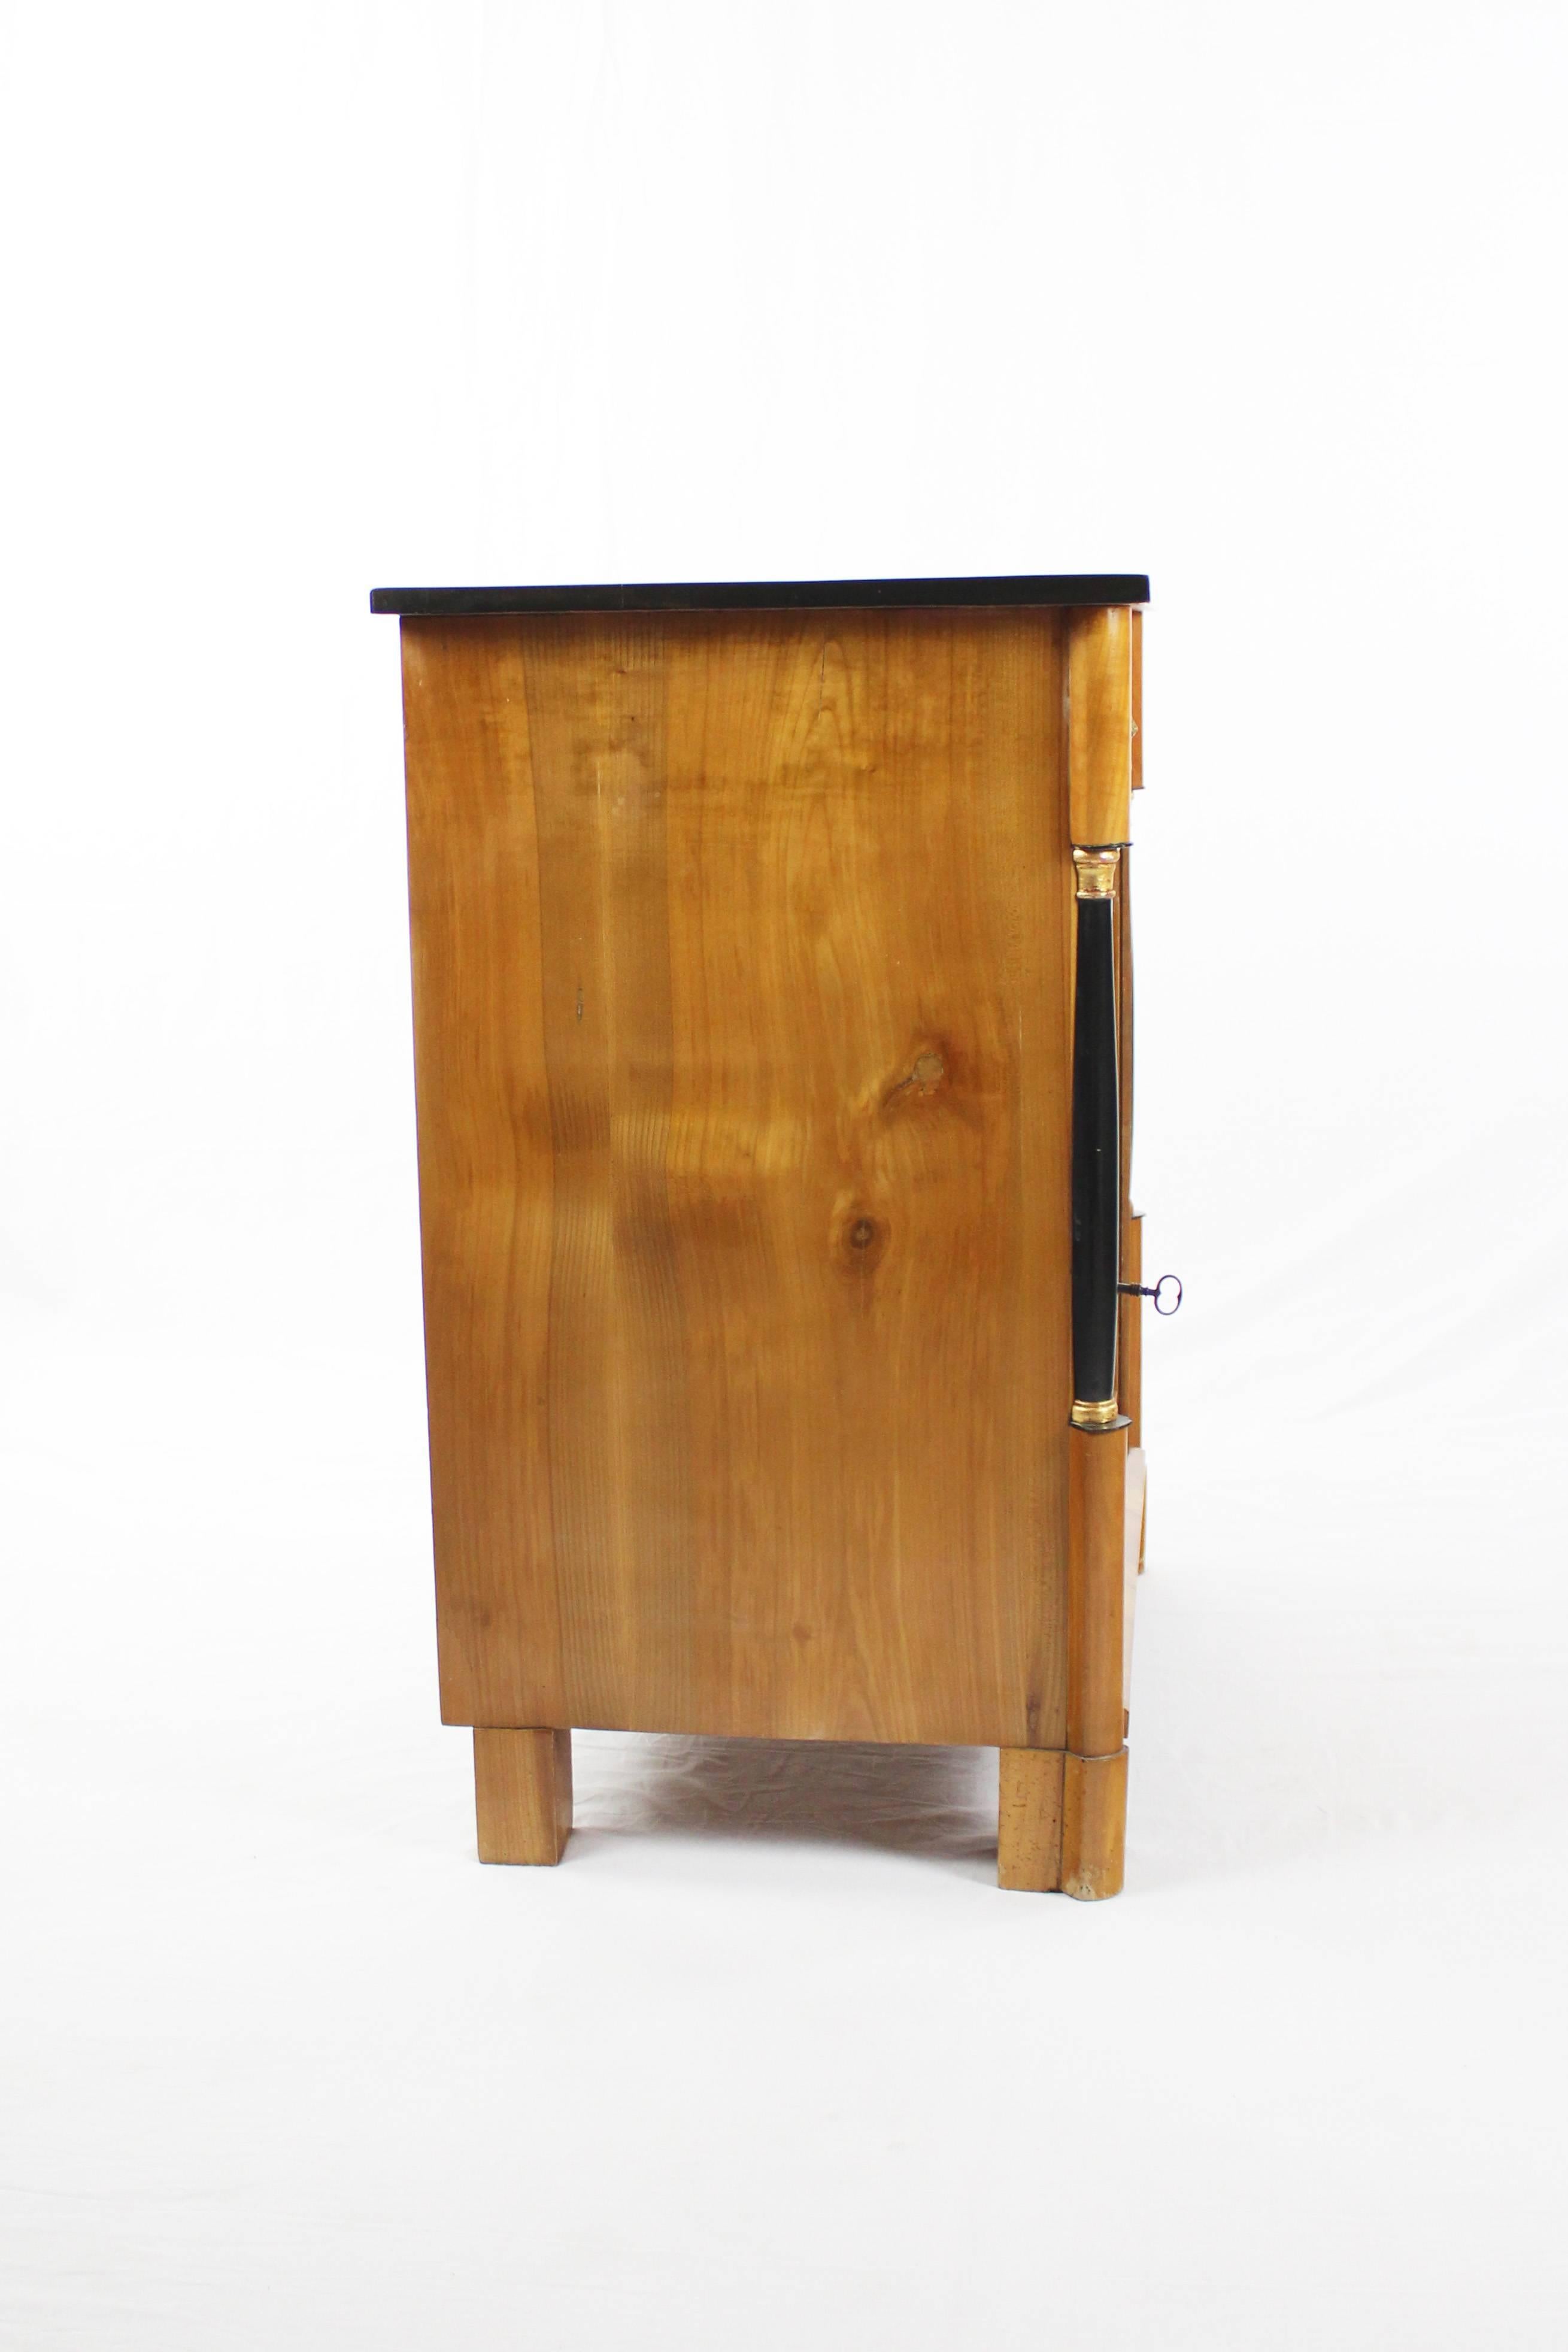 Pillar cupboard,
Biedermeier period circa 1820-1825.
Cherrywood.
One push, one door.
Very rare object.
Glass on top.
Restored state.
Shellac hand polish.
Measures: Height 79.5 cm, width 67 cm, depth 44 cm.

I dispatch by air in safe wood